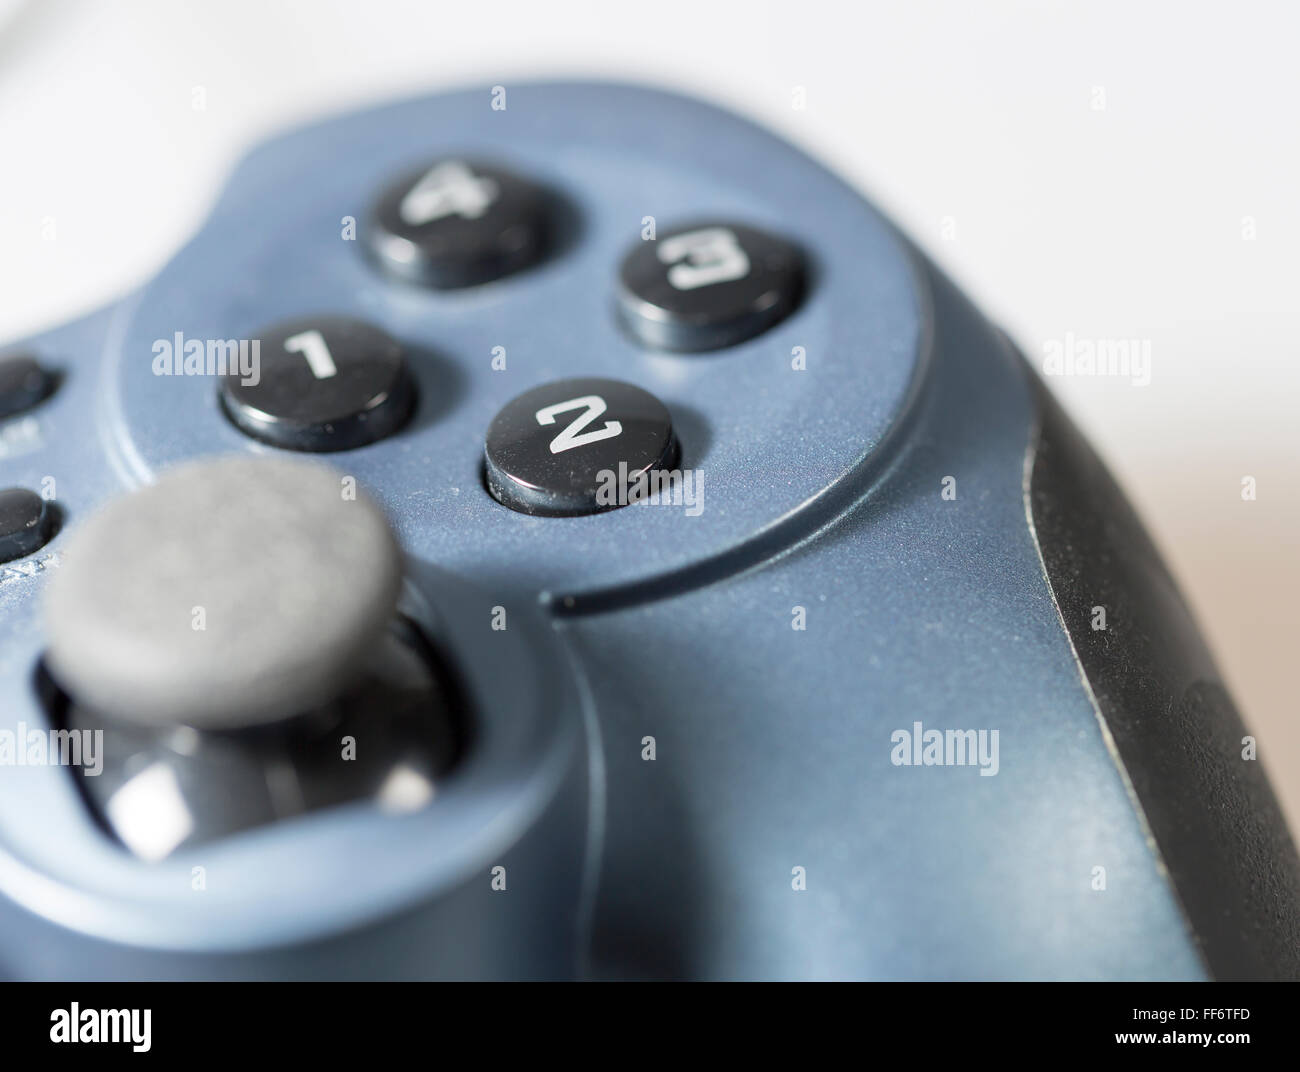 Video Game Controller buttons close up. Stock Photo